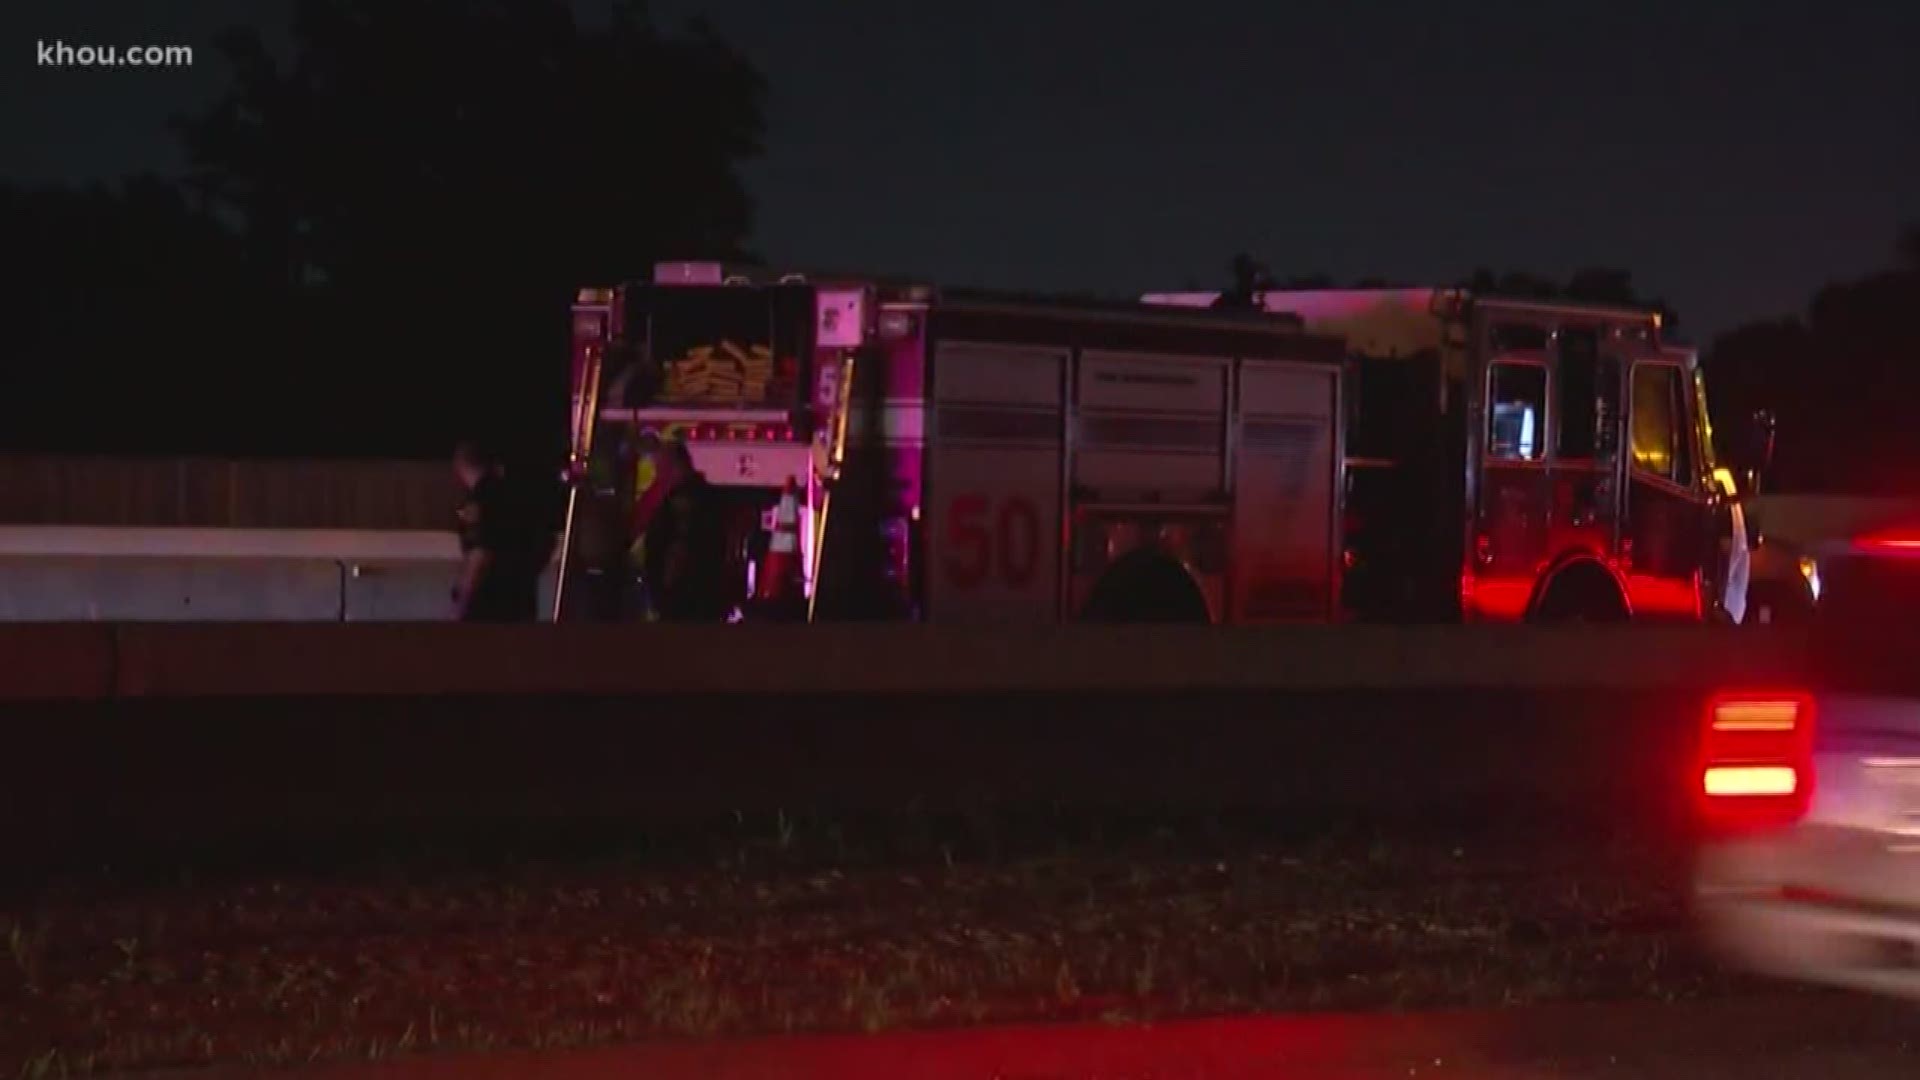 It was a rough night for the Houston Fire Department. There were two wrecks involving fire trucks and an ambulance.